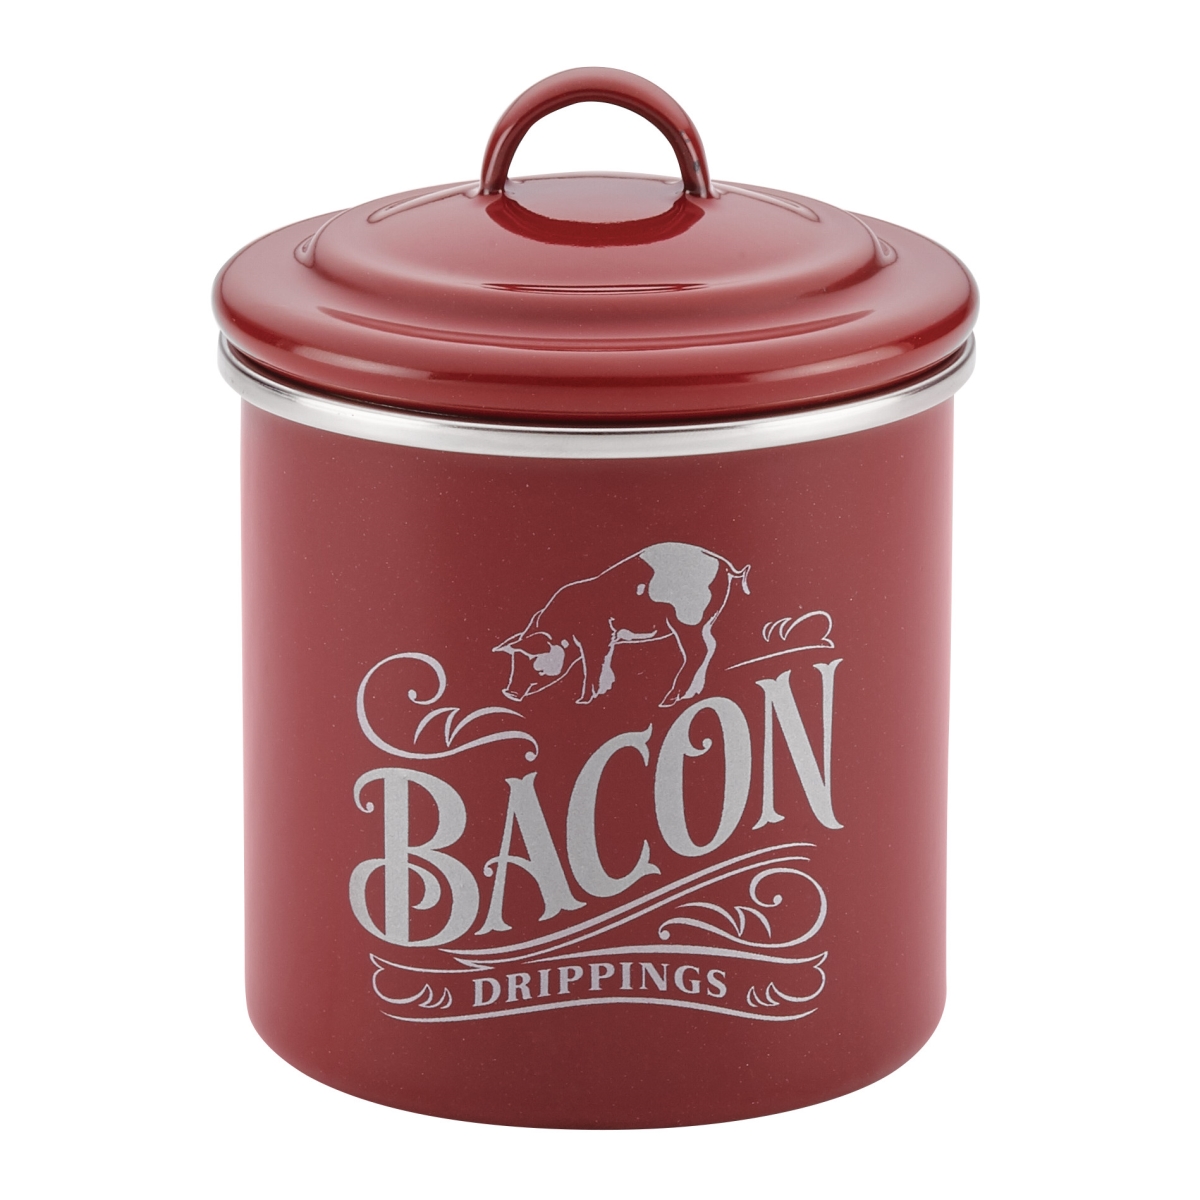 46948 Enamel On Steel Bacon Grease Can, 4 X 4 In. - Sienna Red